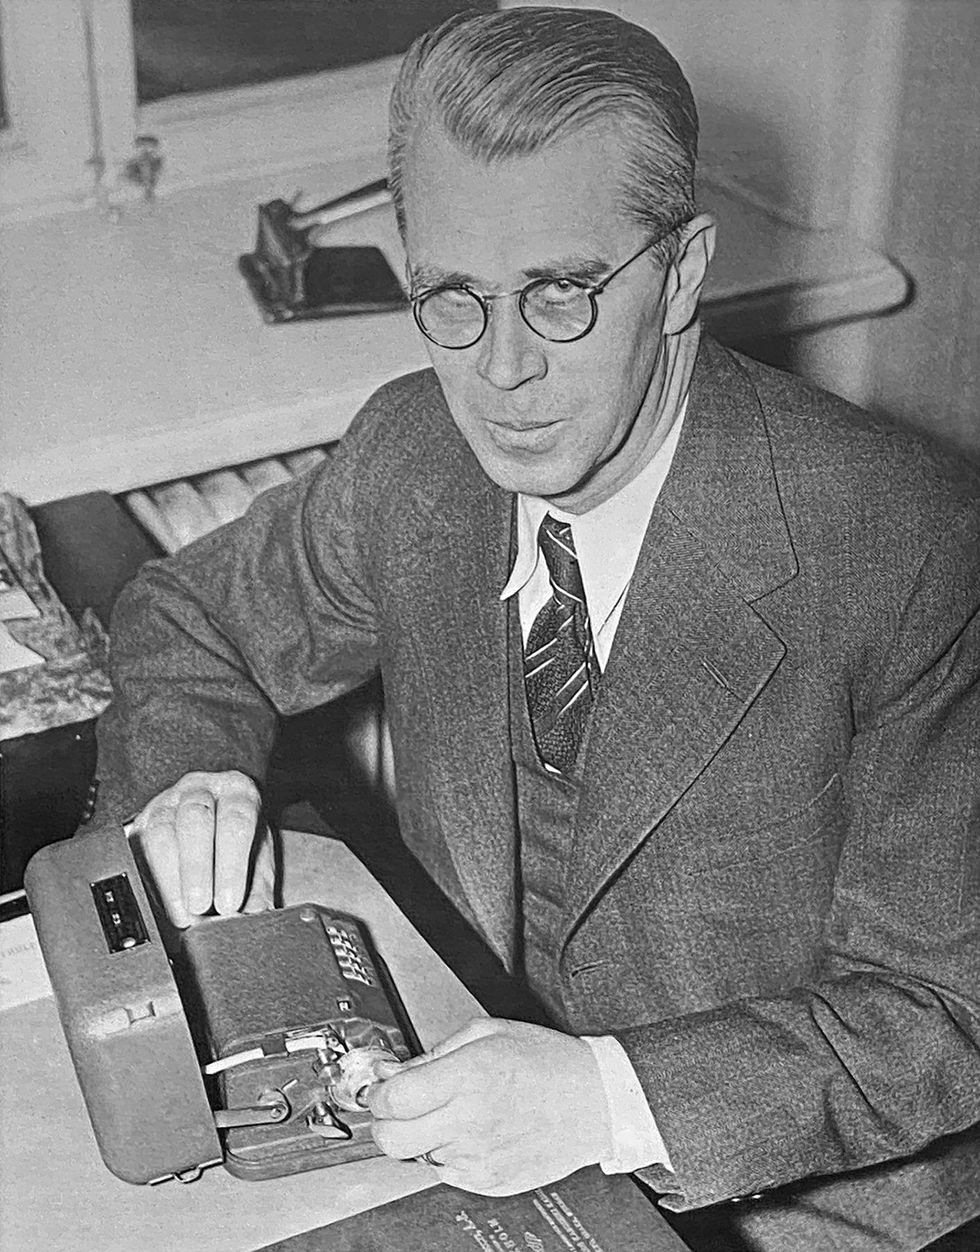 Photo of a man with glasses at a desk with his hands on a cryptology device.  